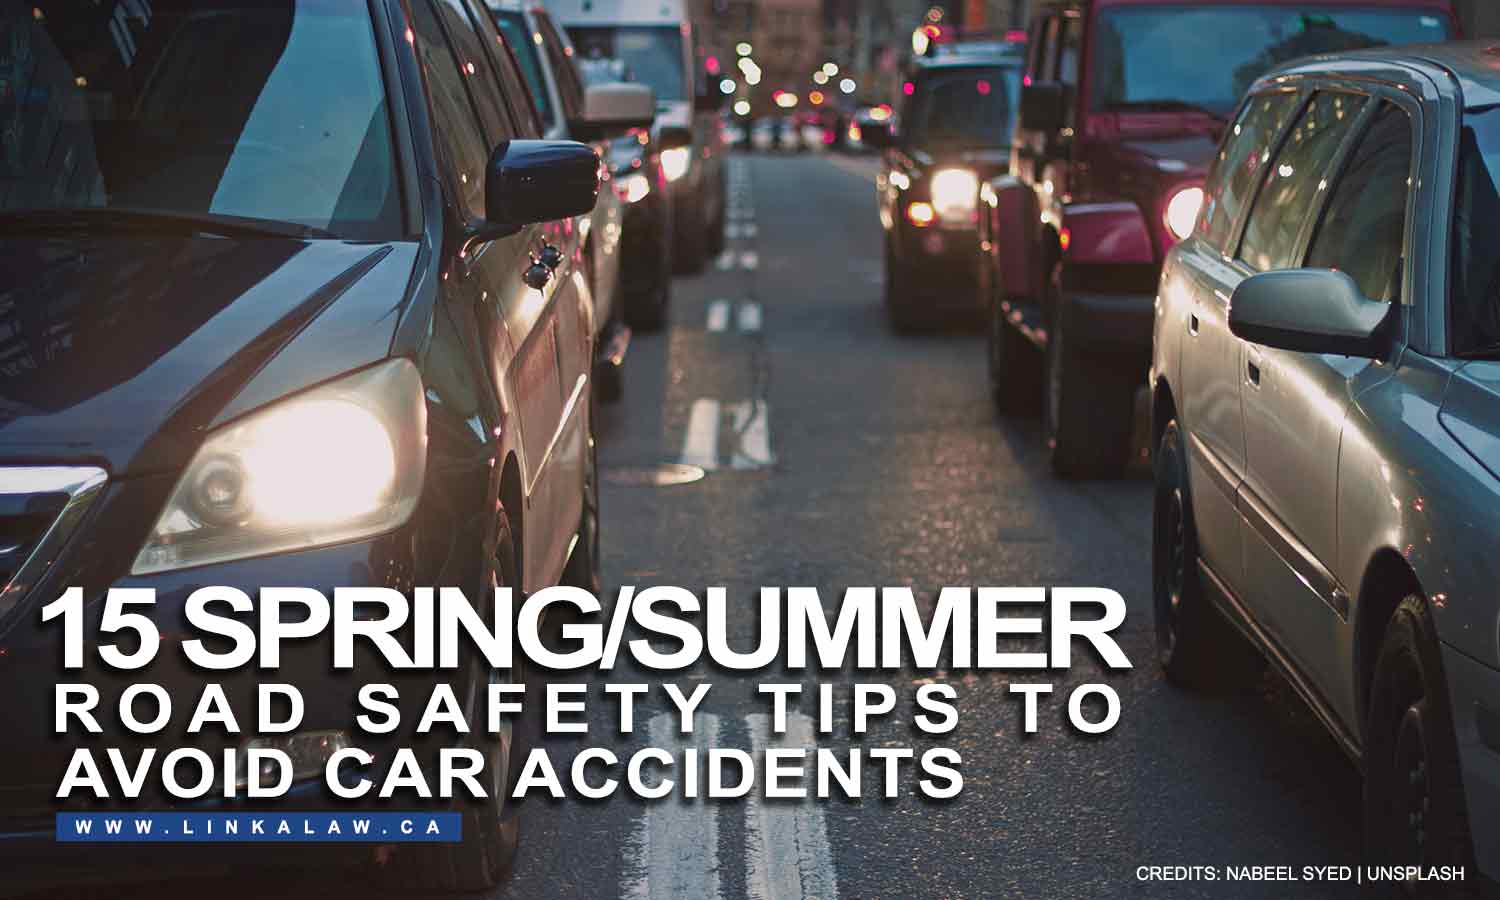 15 Spring/Summer Road Safety Tips to Avoid Car Accidents